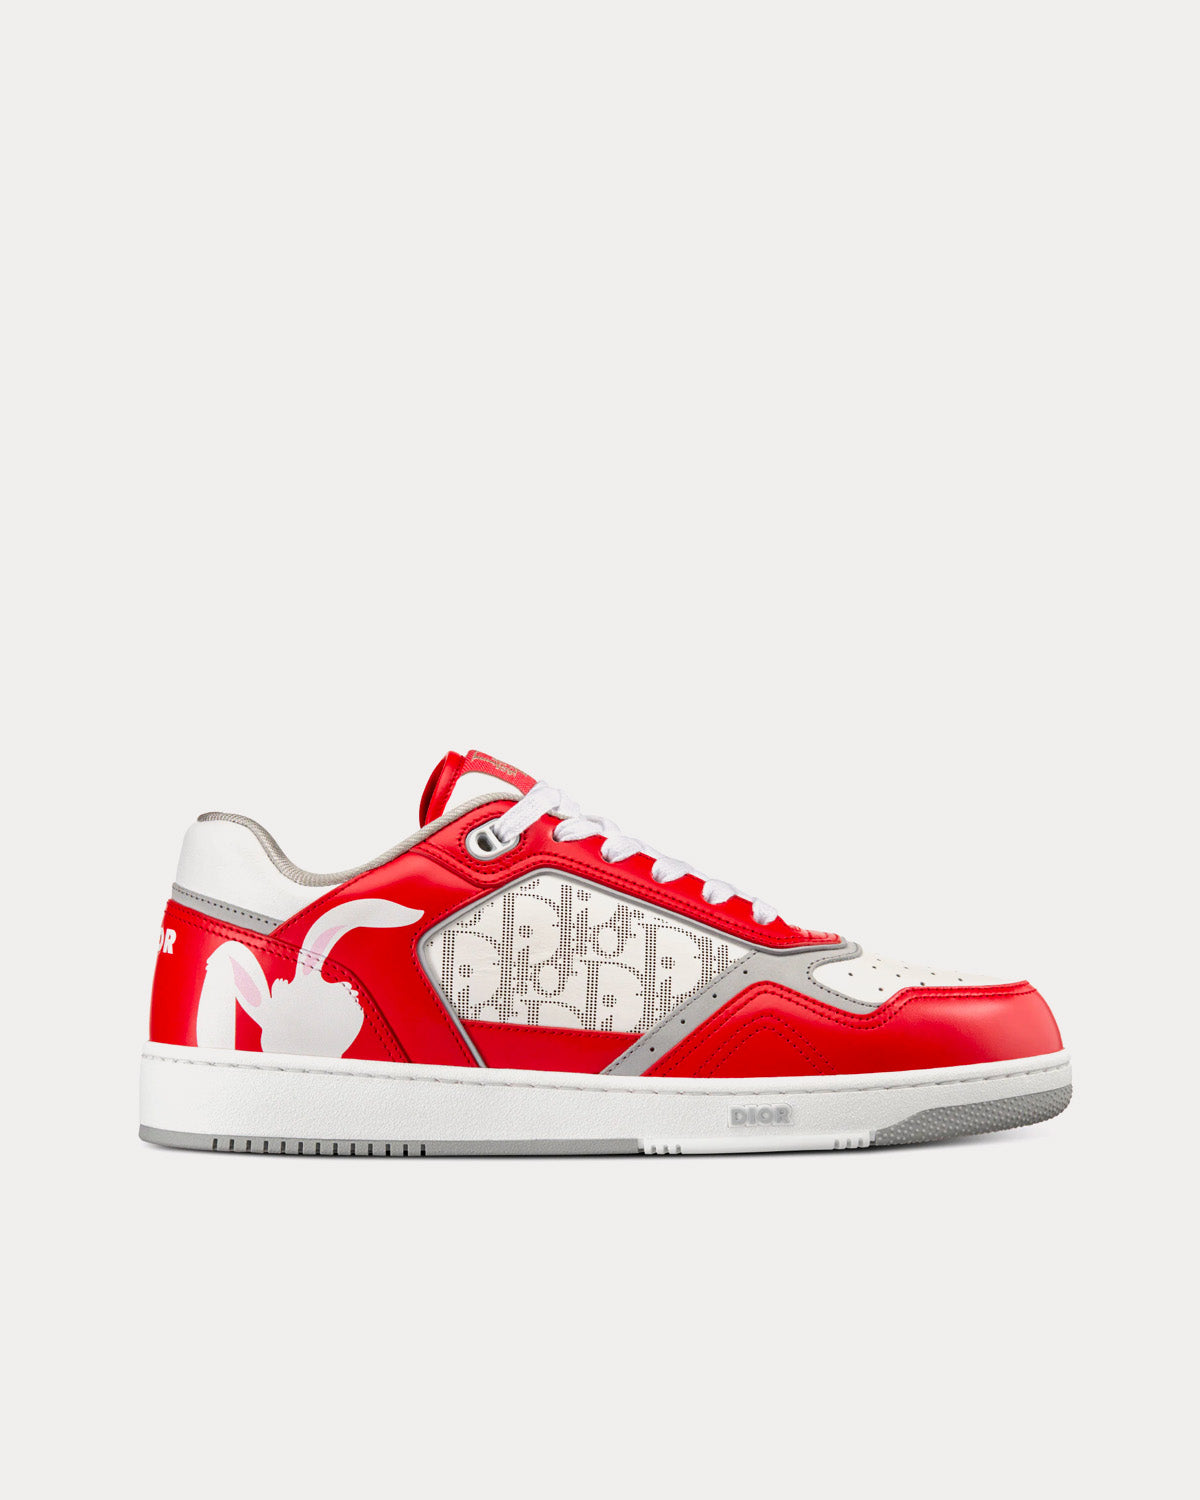 Dior x ERL - B27 Red and White Smooth Calfskin and White Dior Oblique Galaxy Leather with Rabbit Motif Low Top Sneakers